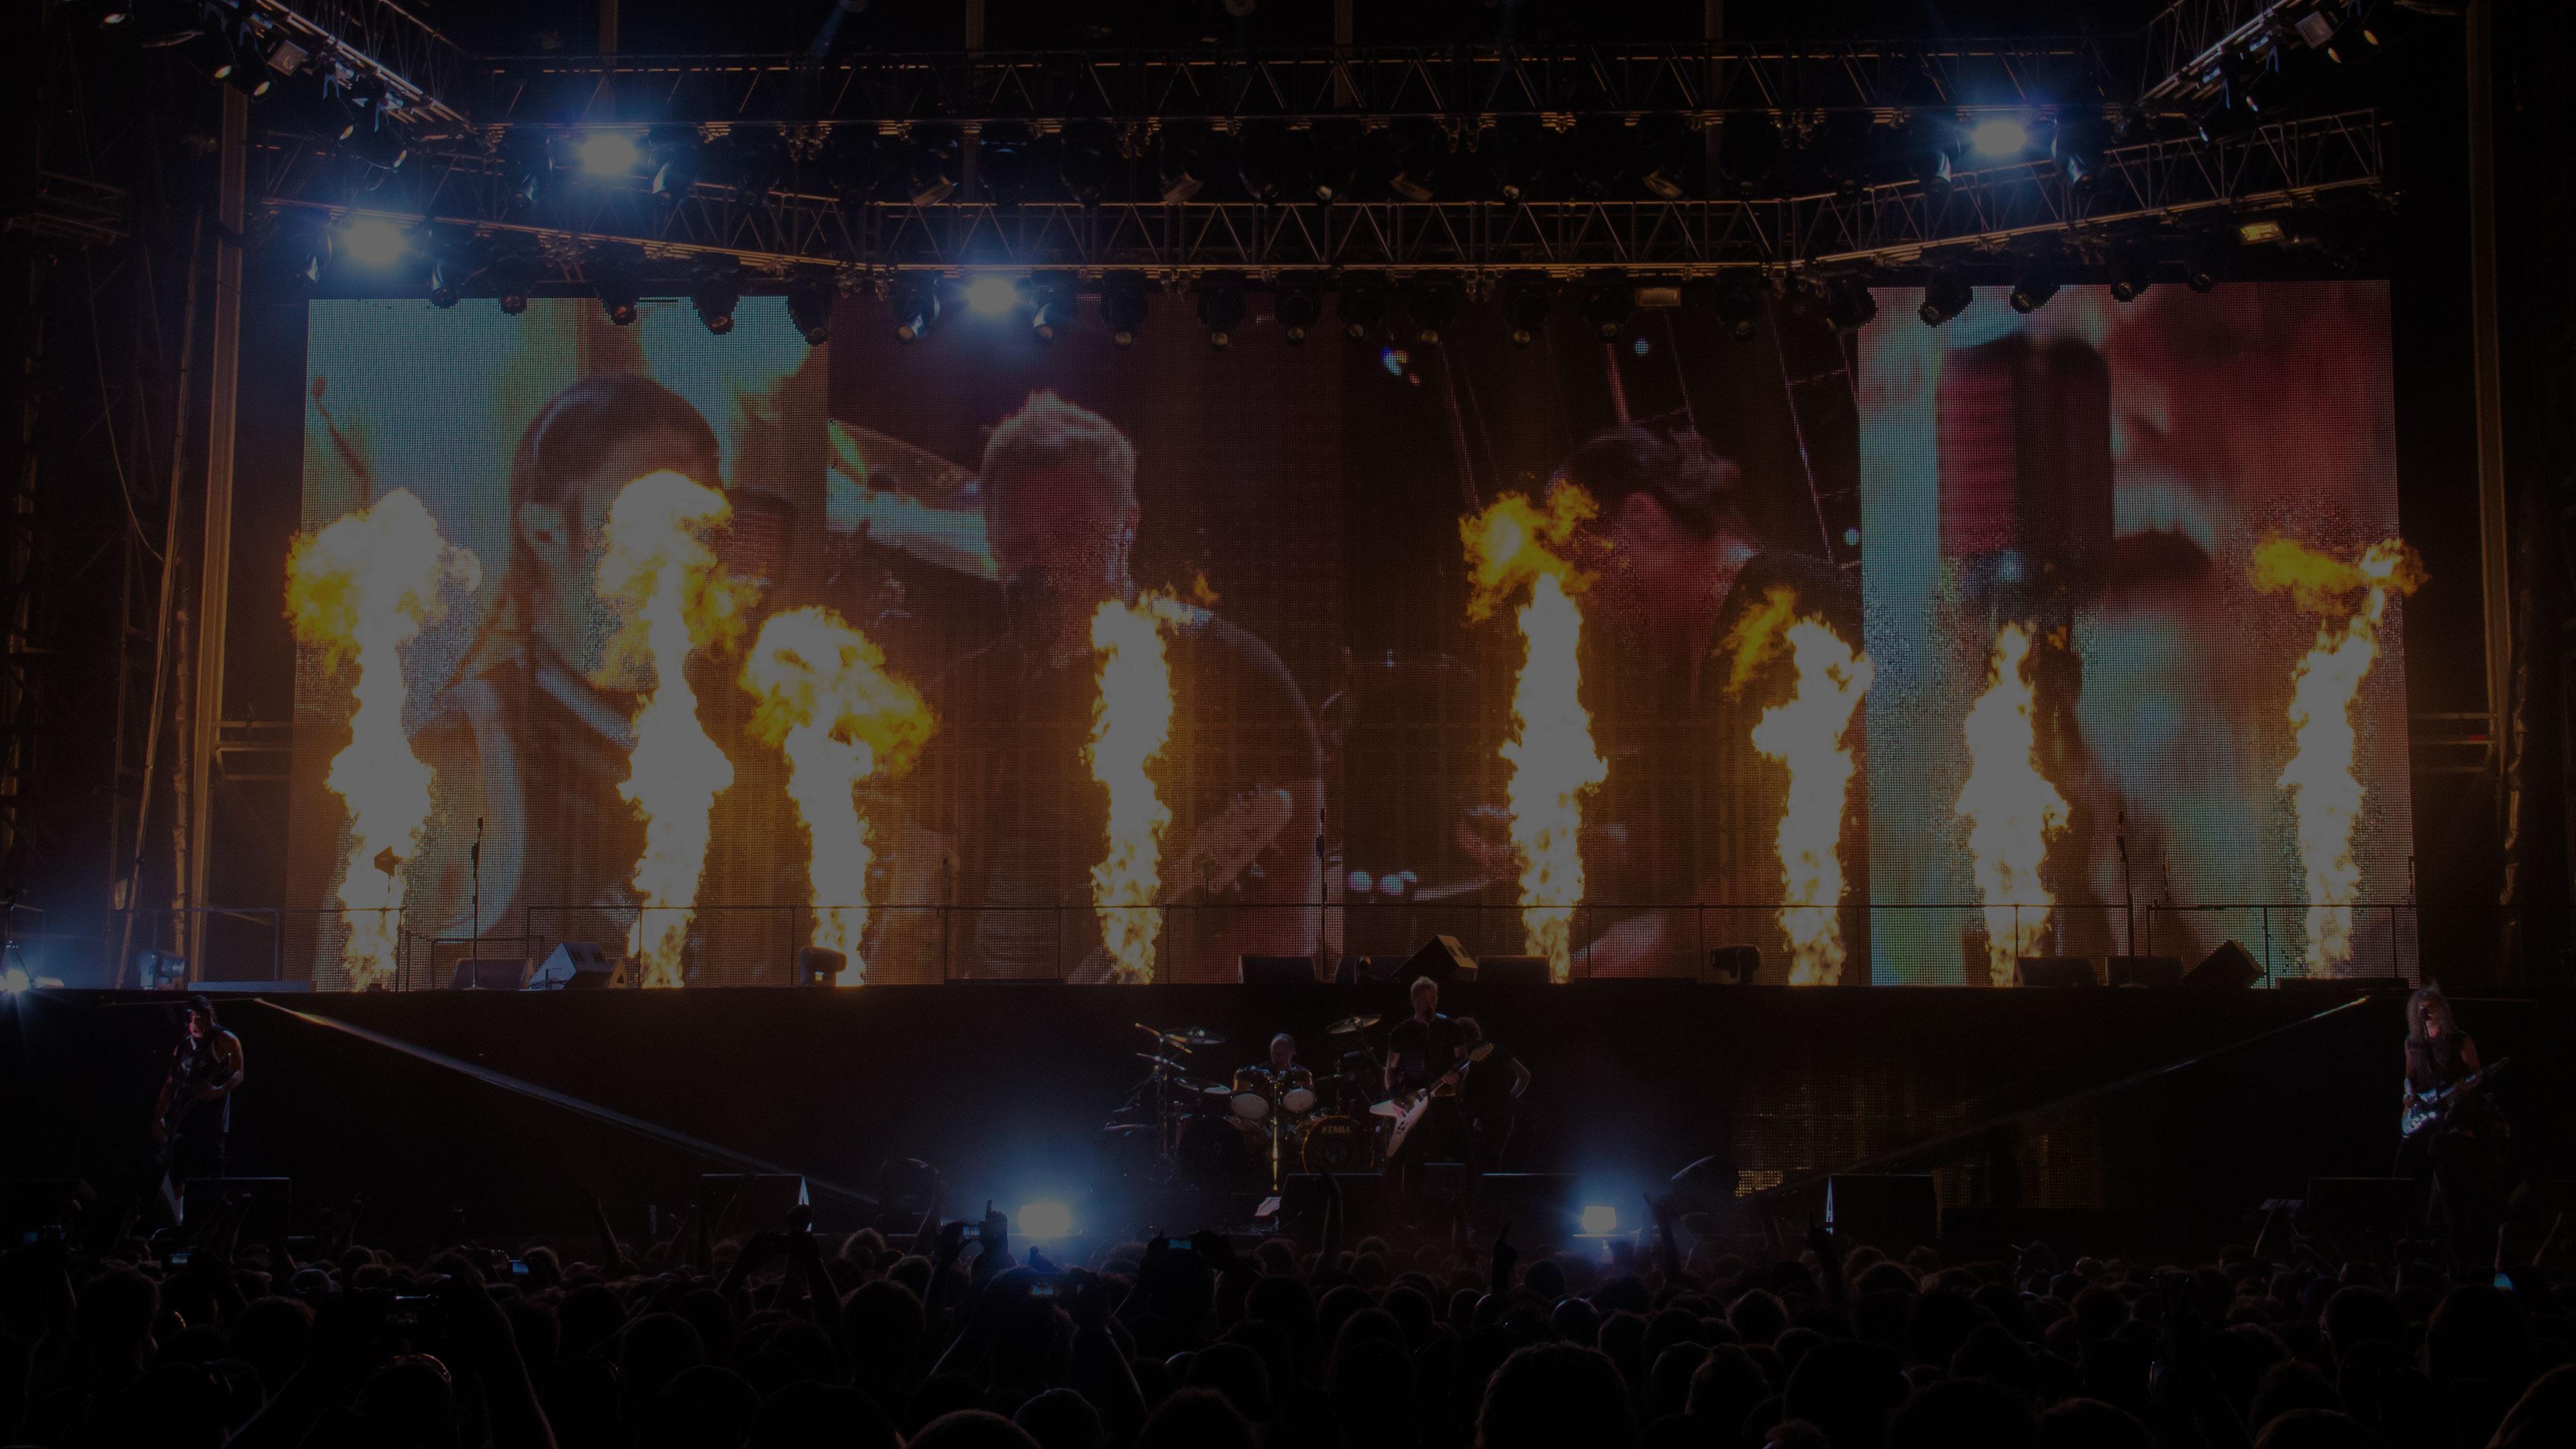 Banner Image for the photo gallery from the gig in Adelaide, Australia shot on March 2, 2013